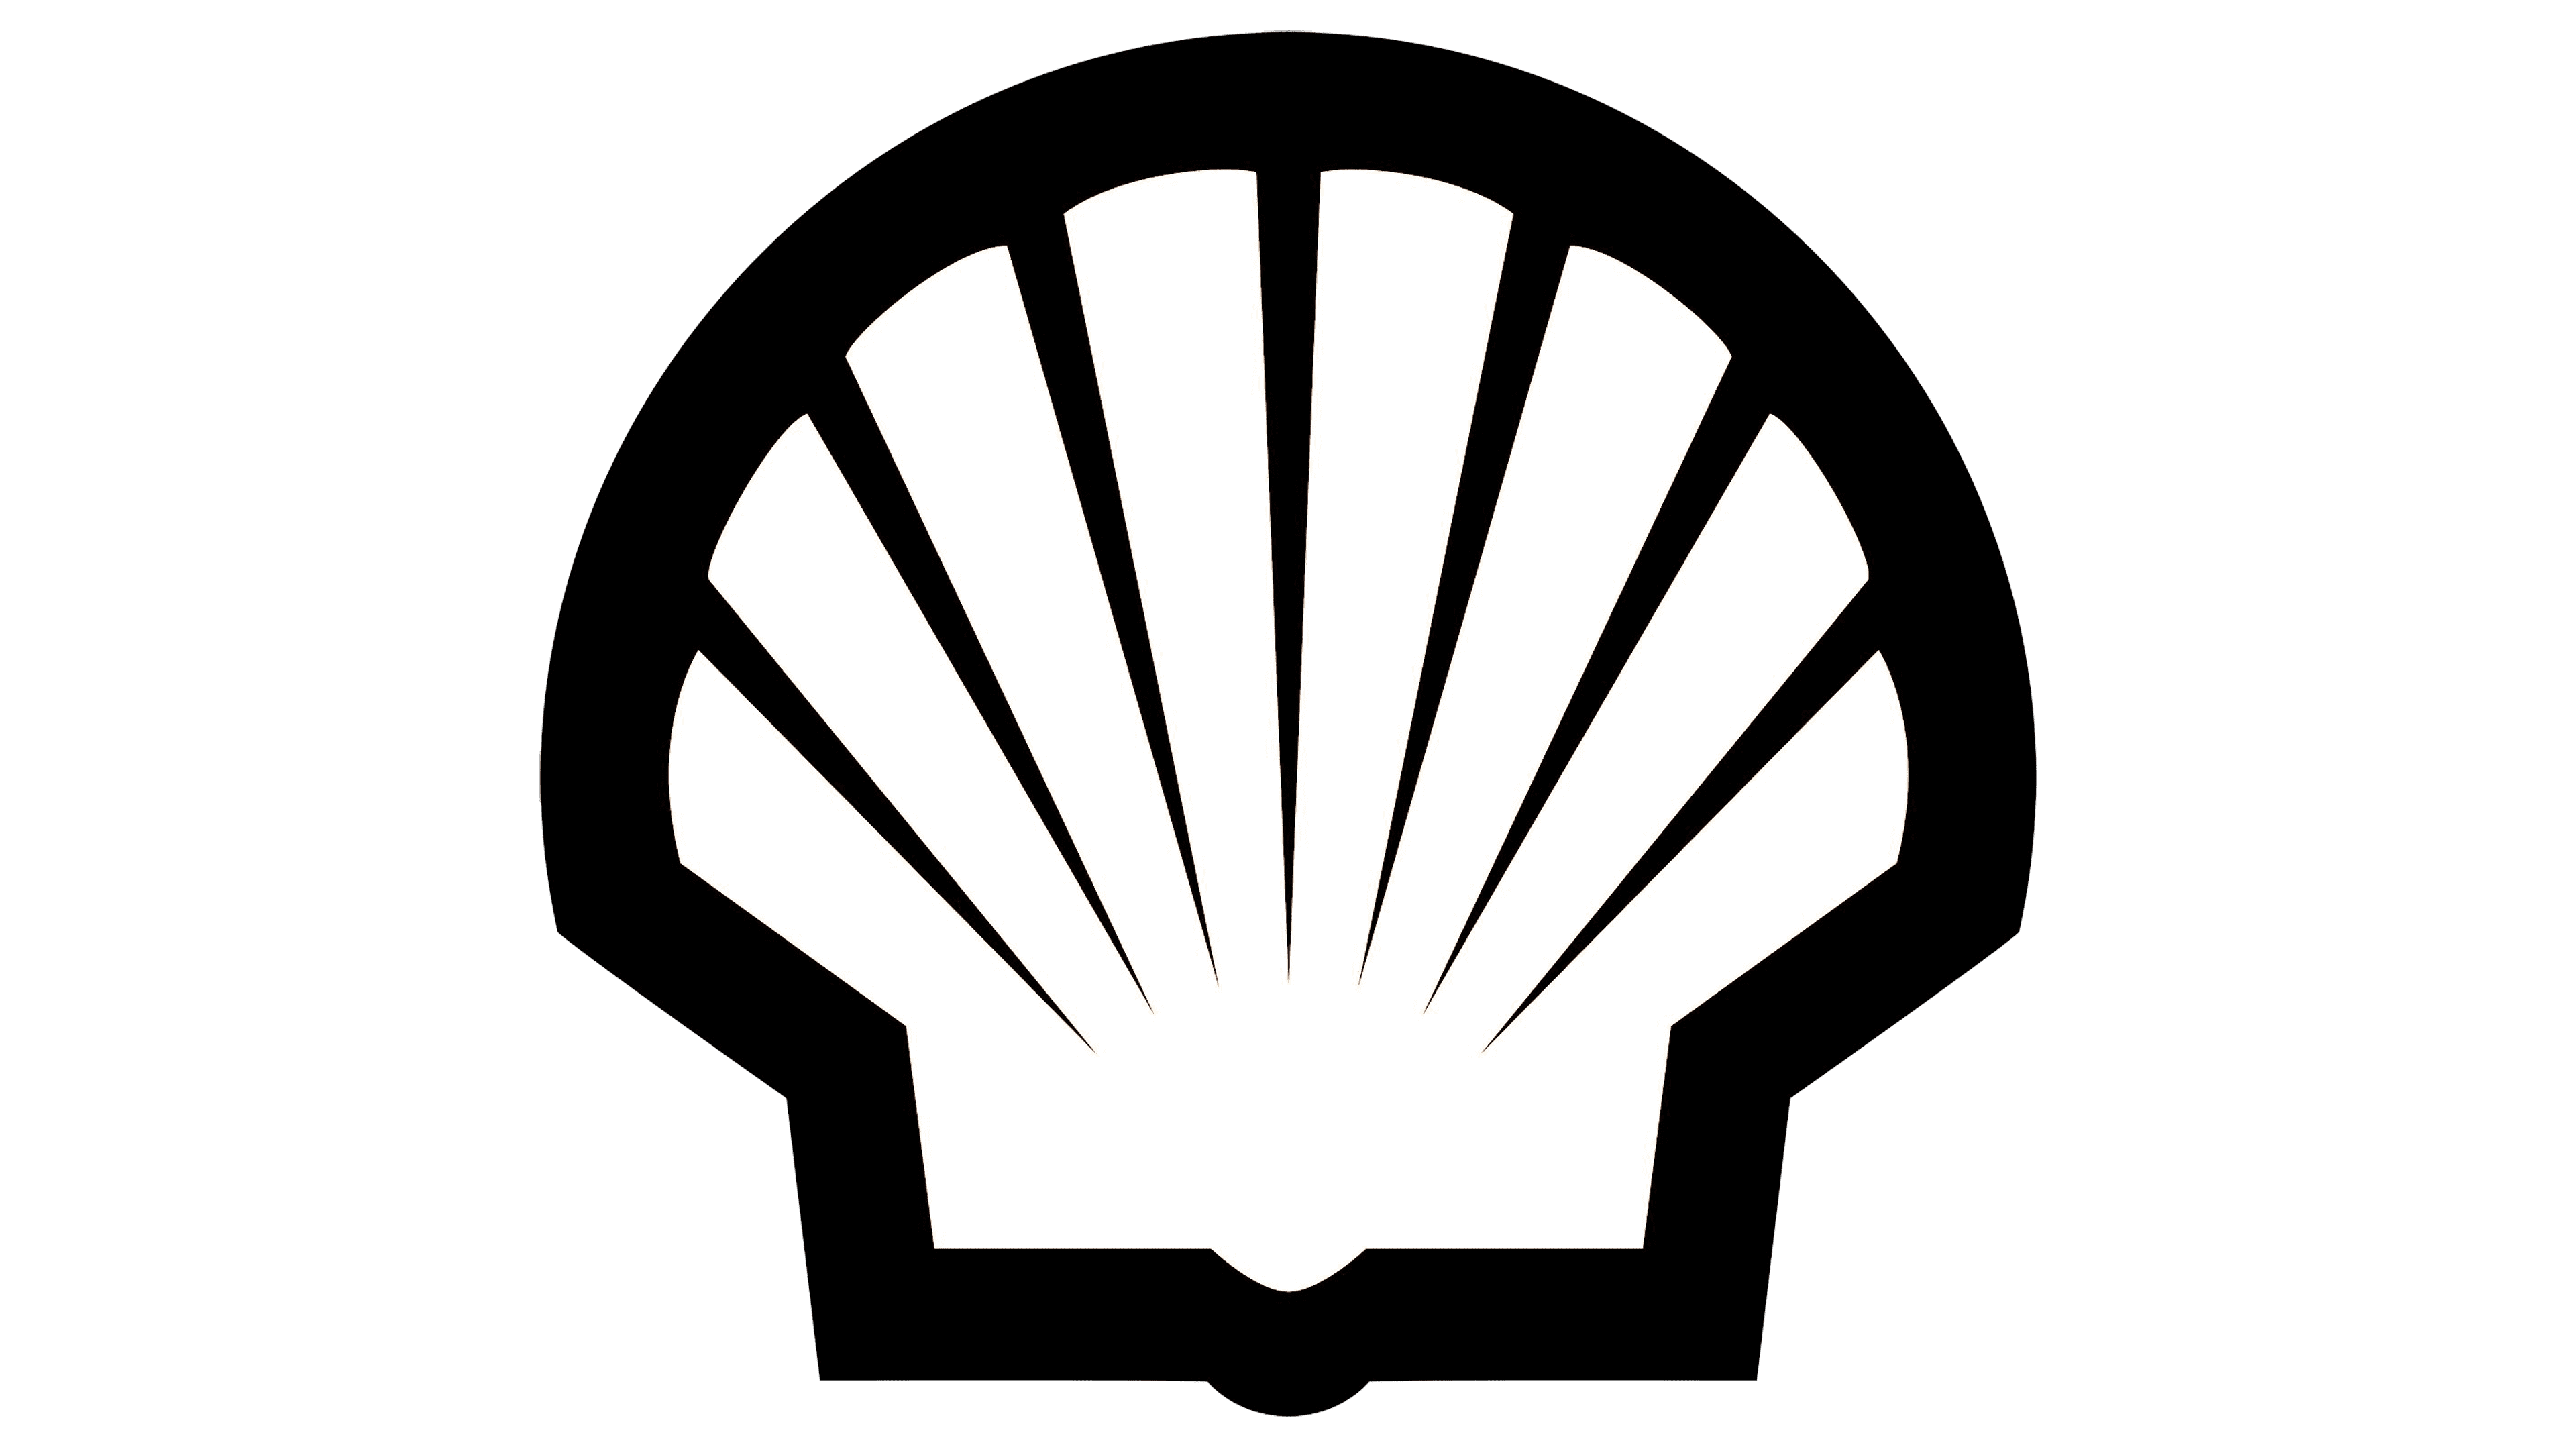 Shell Logo and sign, new logo meaning and history, PNG, SVG